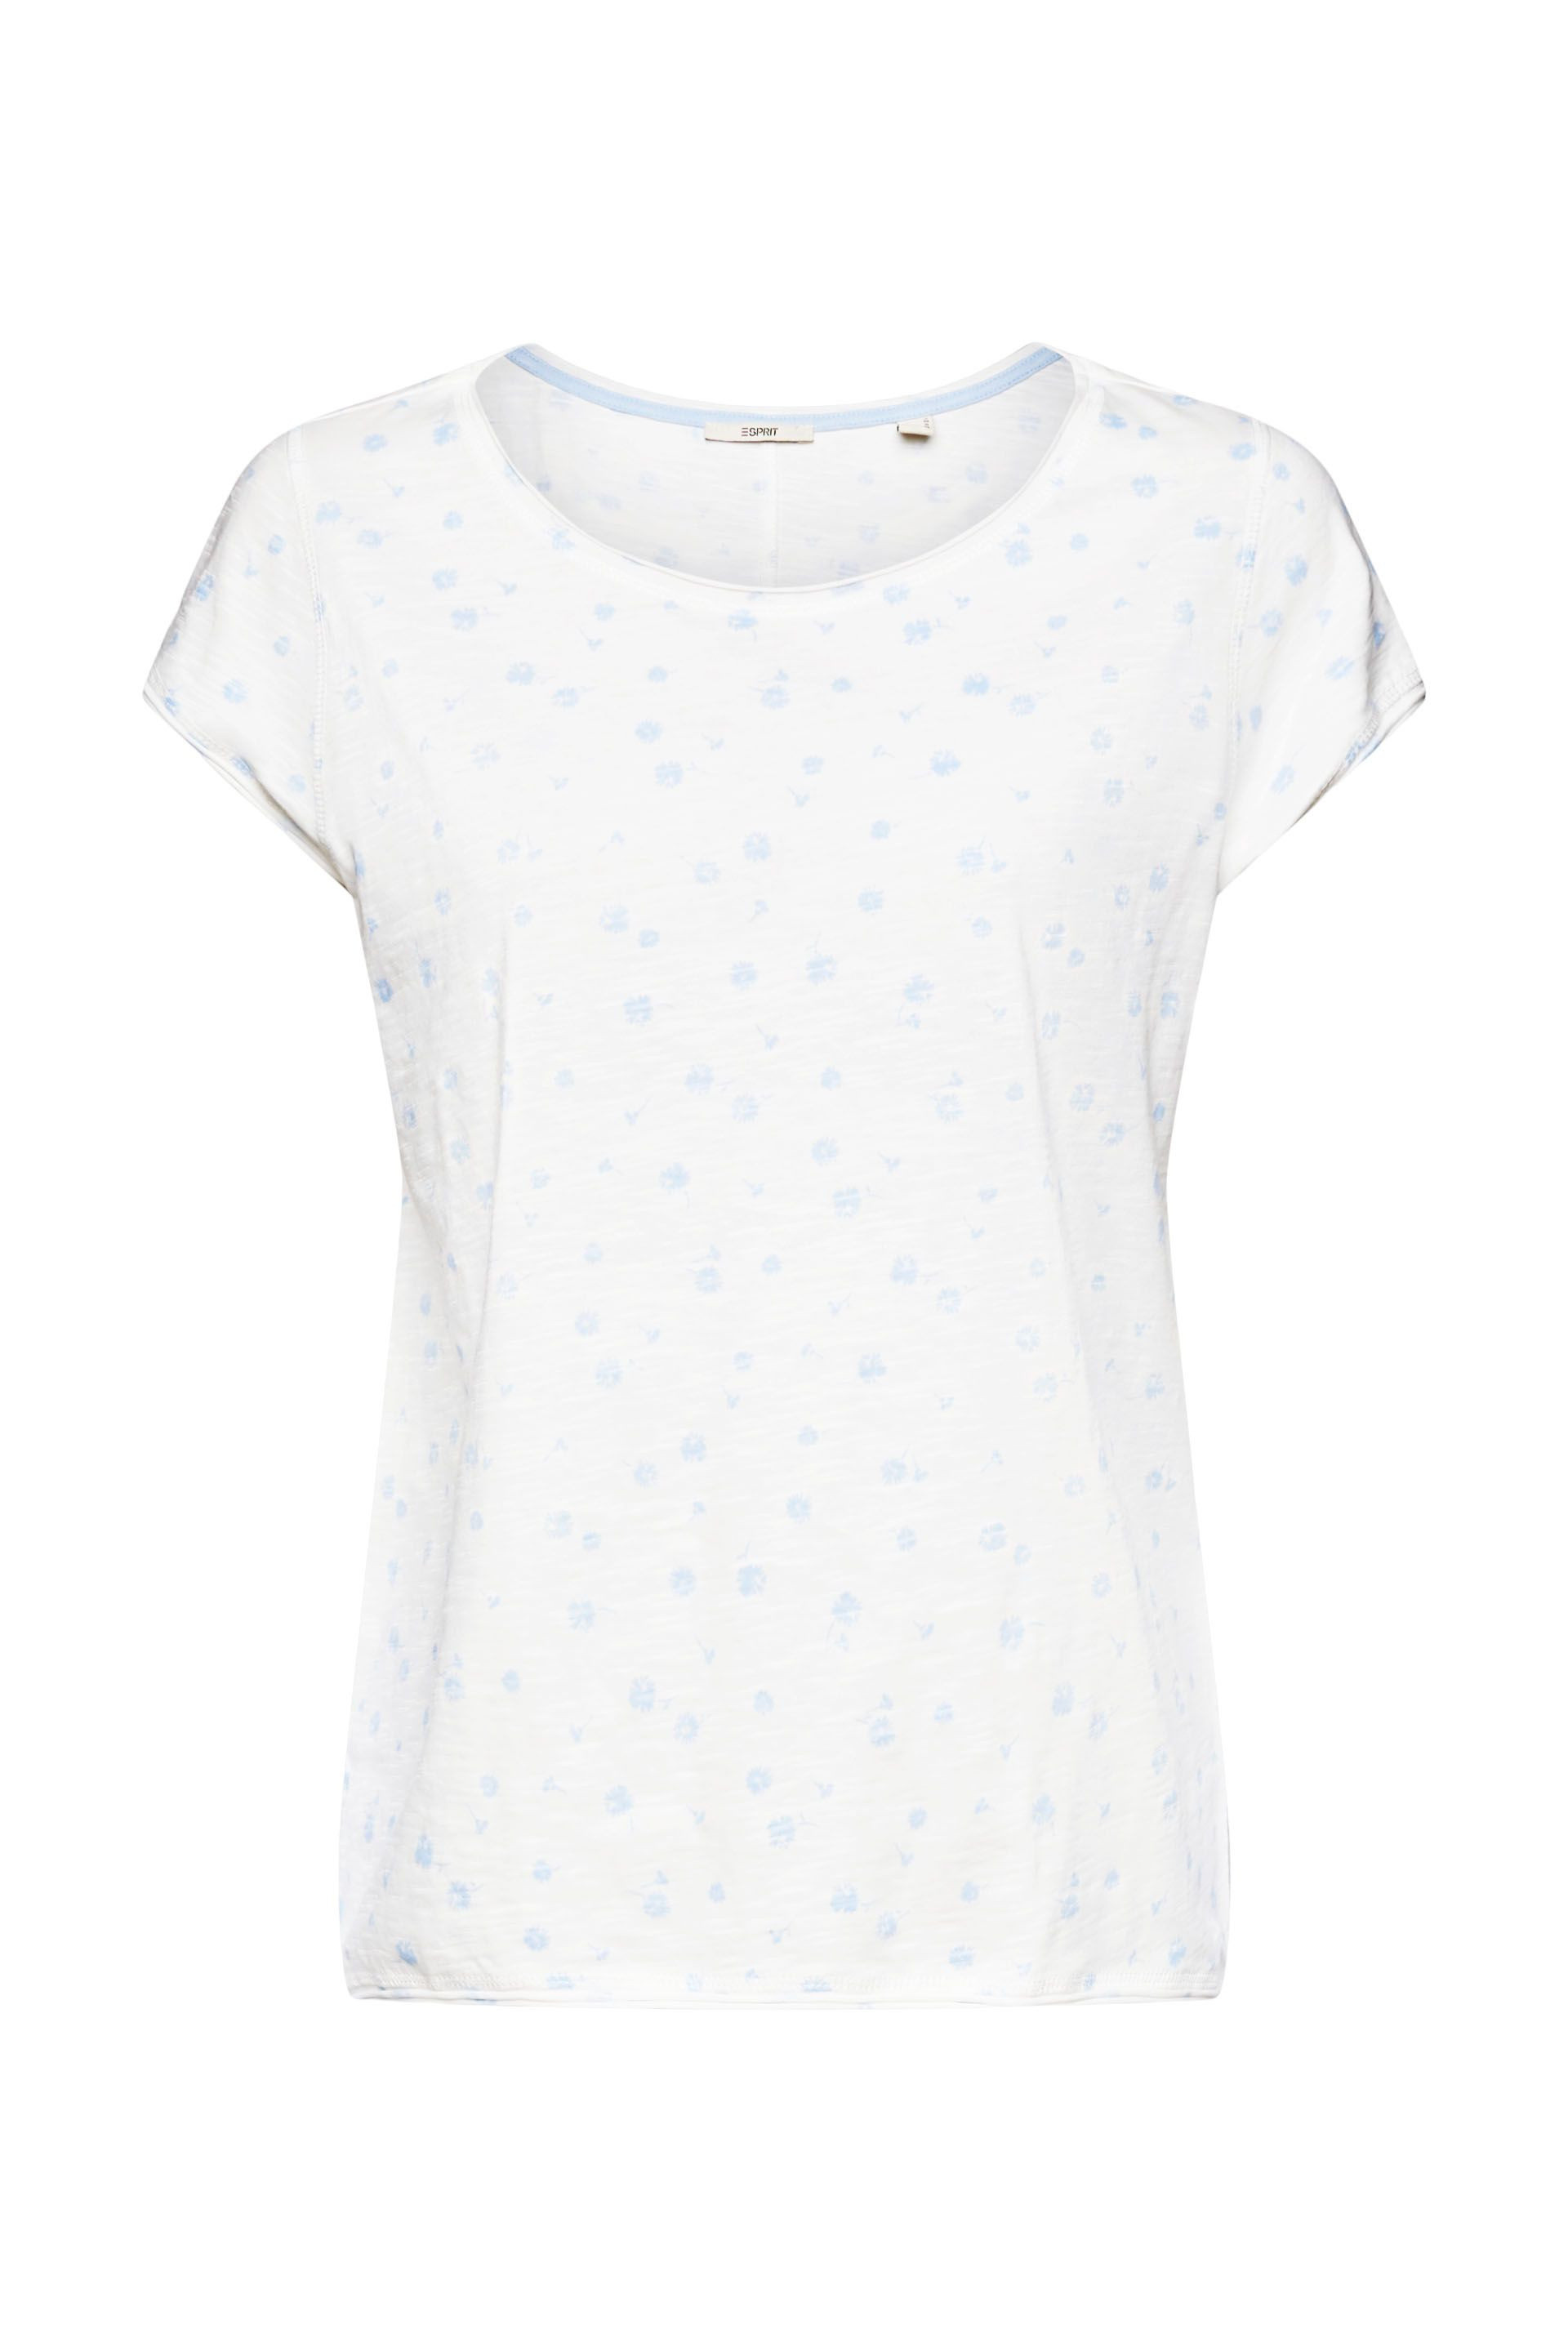 Esprit - T-shirt with print, White, large image number 0